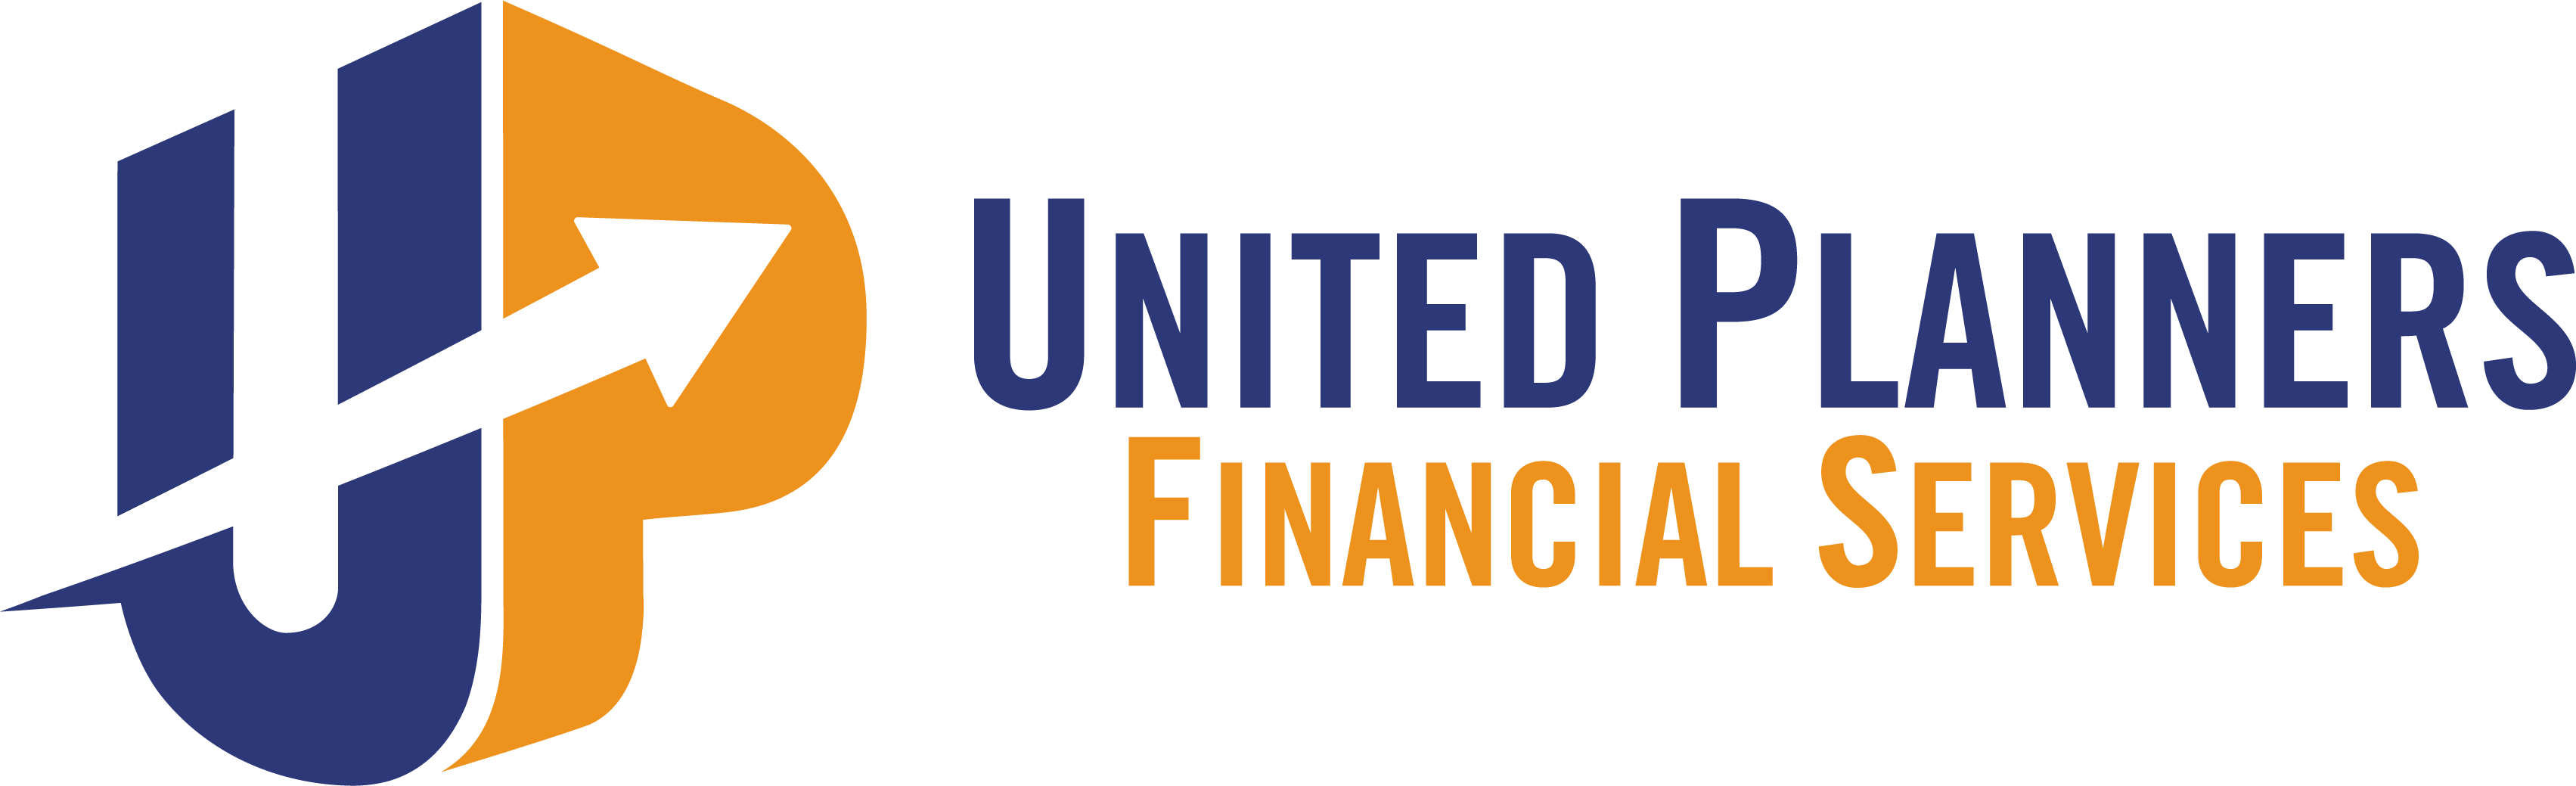 united-planners-podcast-logo.png